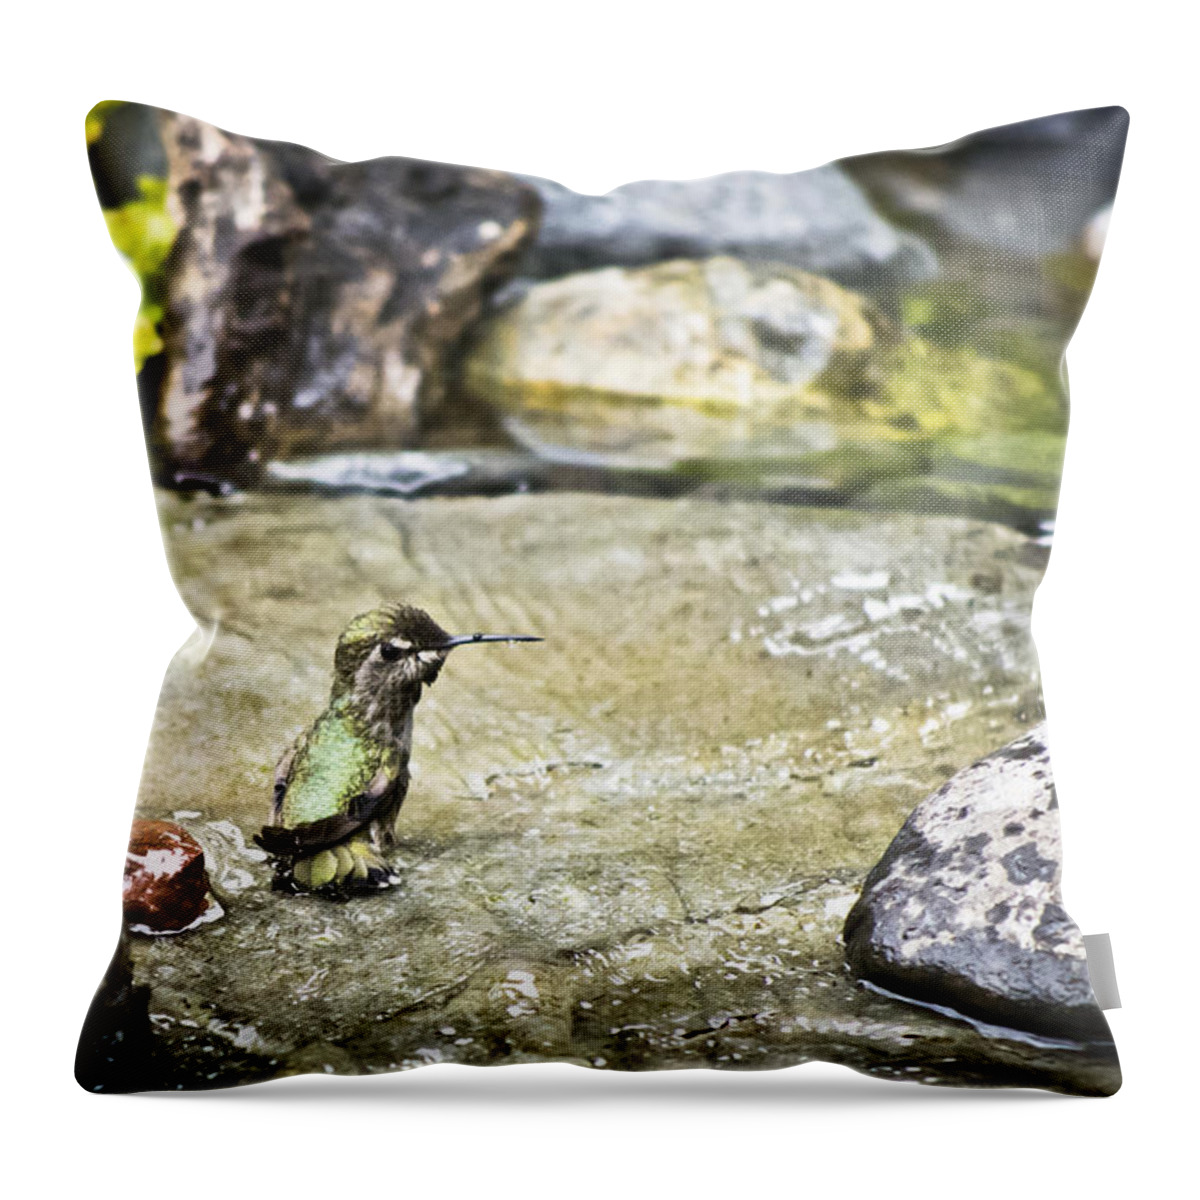 Hummingbird Throw Pillow featuring the photograph Caught In The Act by Priya Ghose